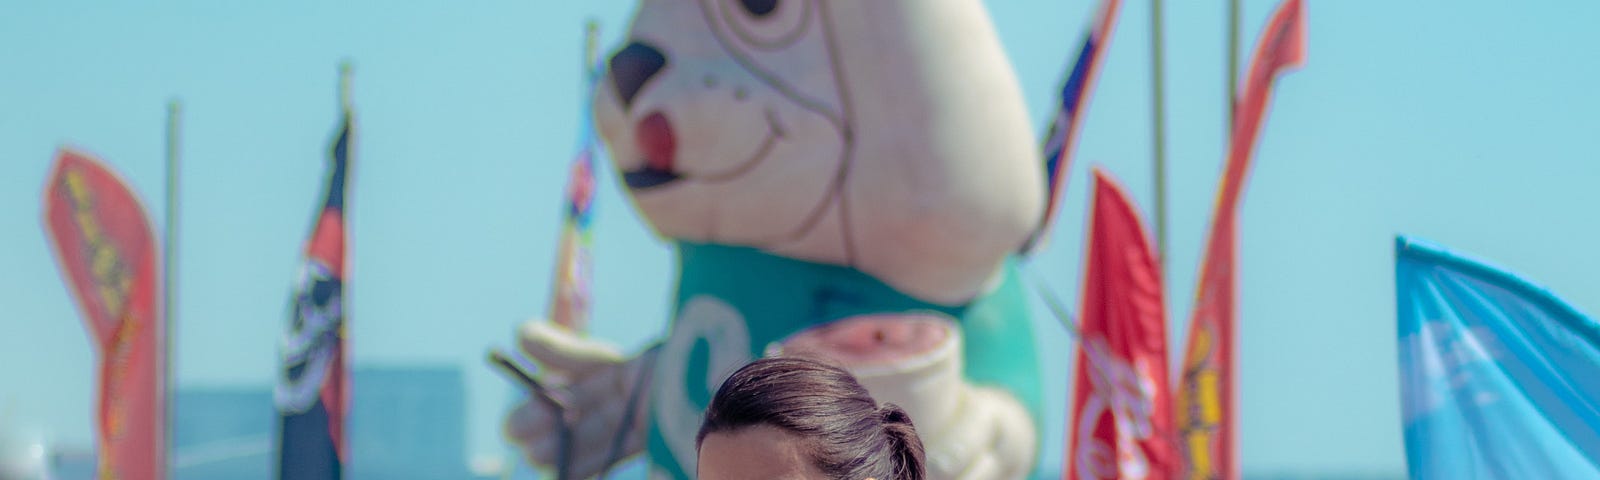 A young, brunette woman turn to look at the camrea. the caption read’s “Jeff loved crazy golf. Sadly he was shit at it” (Image: Unsplash)